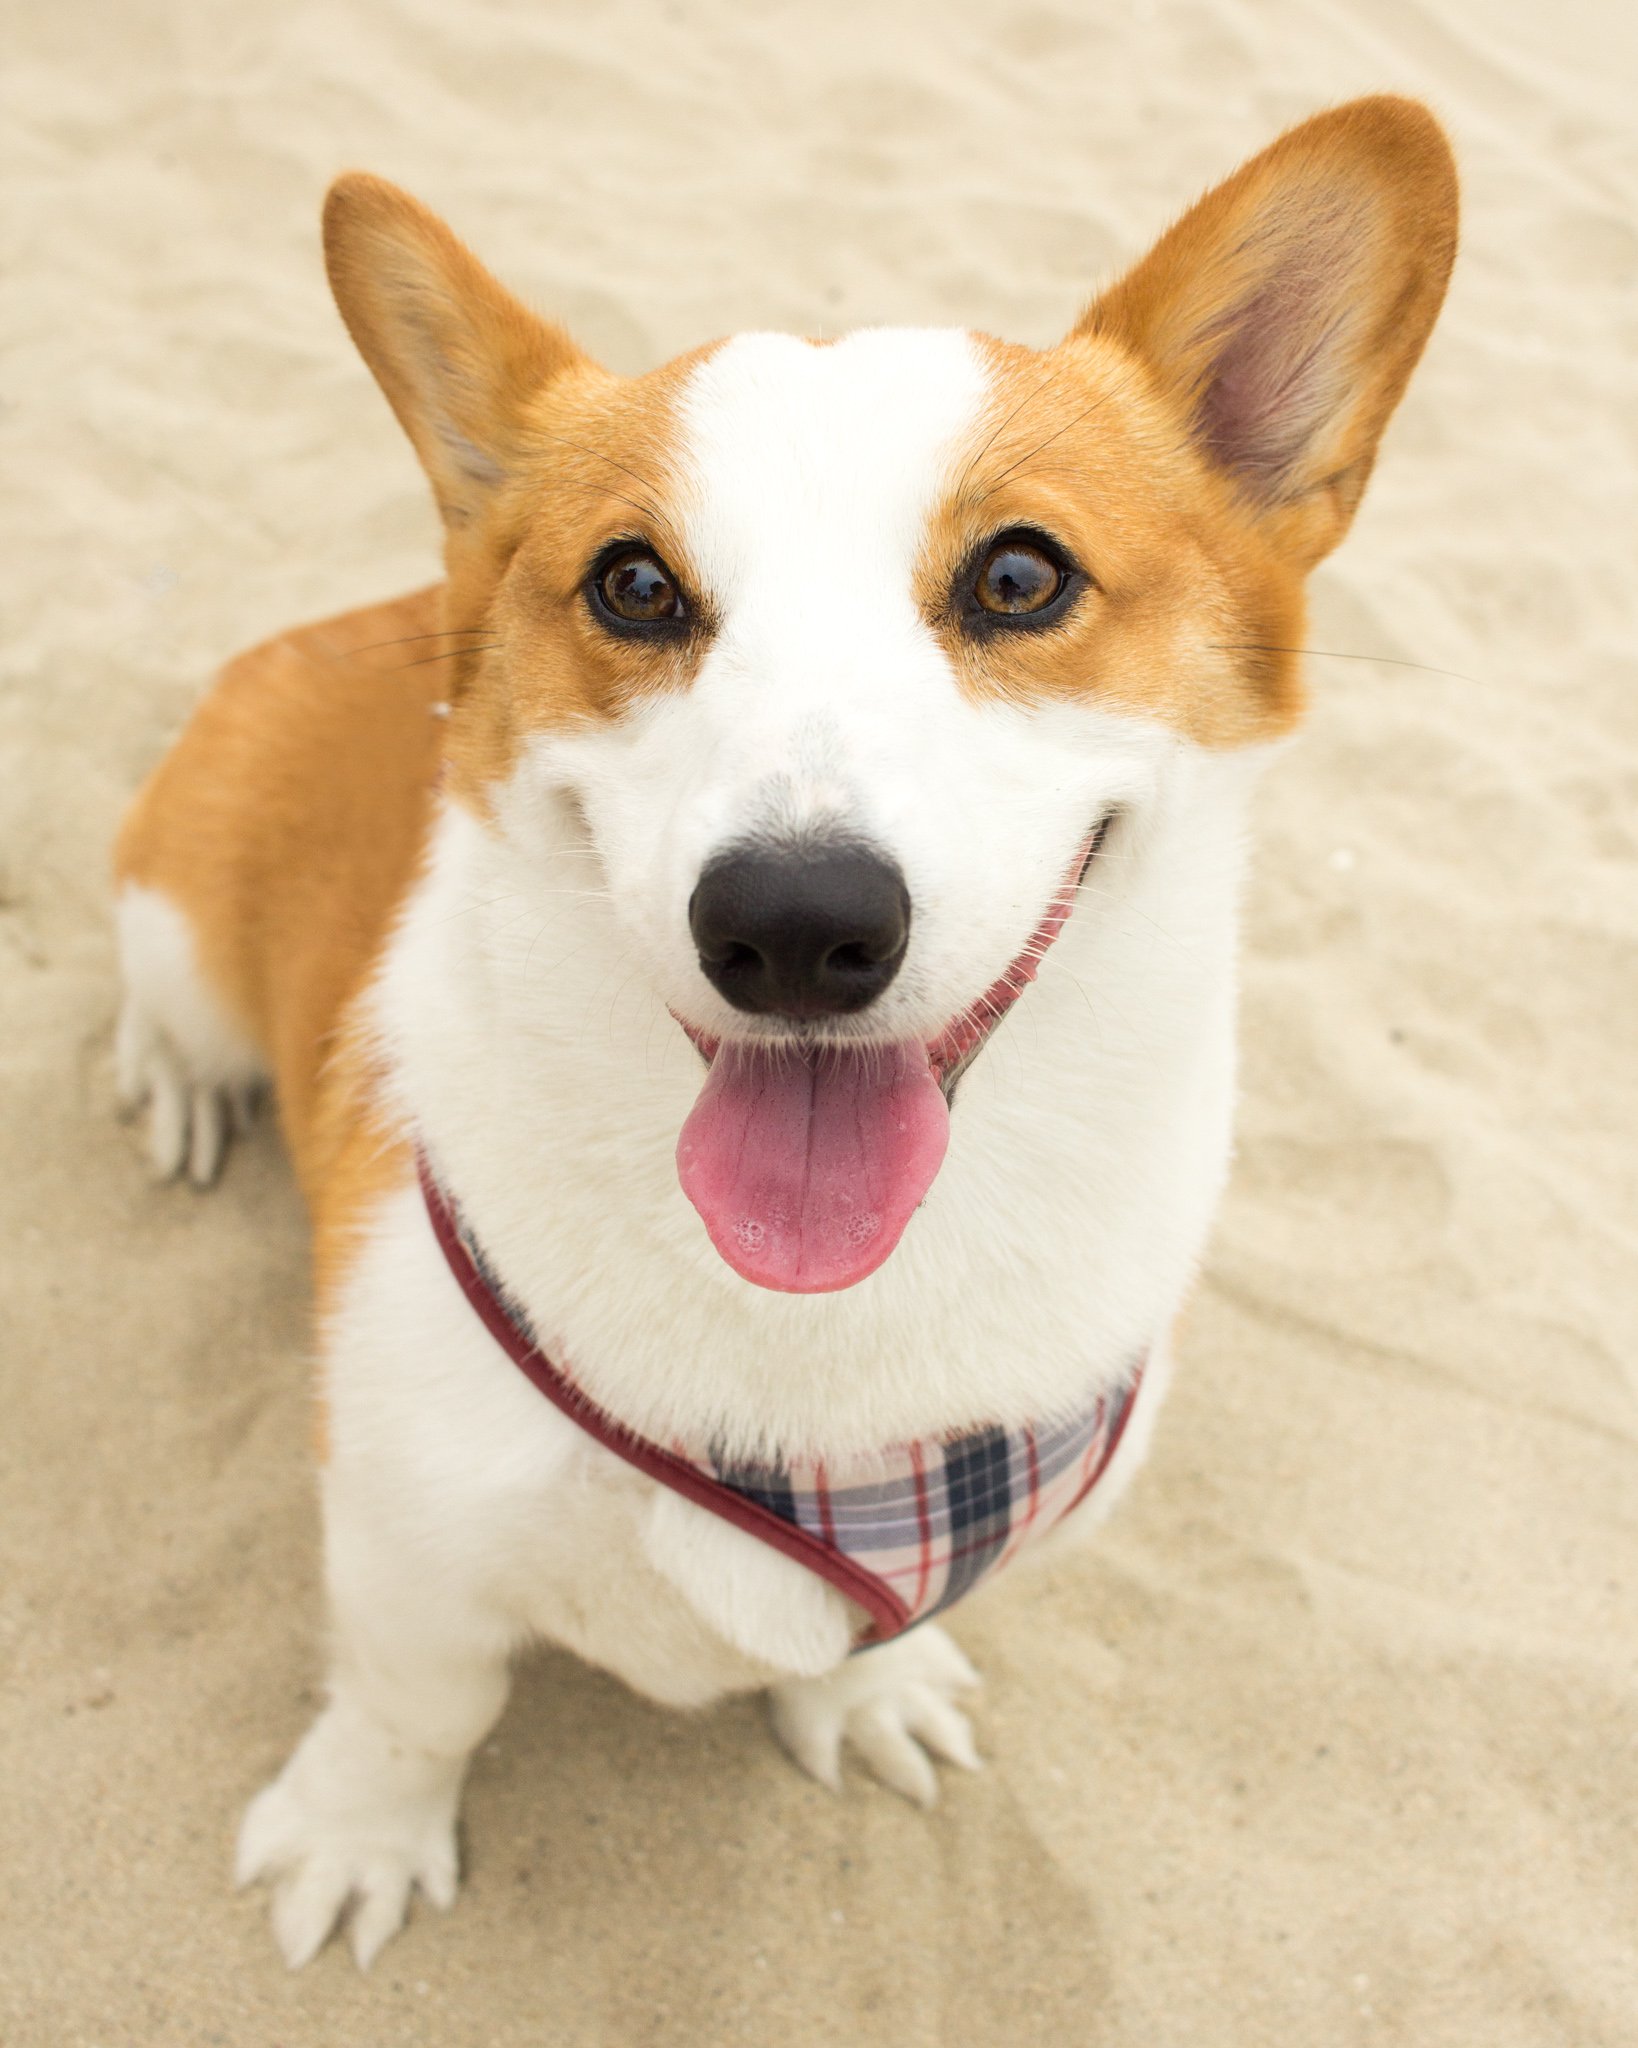 Orange County Pet and Dog Photography - by Steamer Lee - Corgi Beach Day - Southern Caliornia  02.JPG